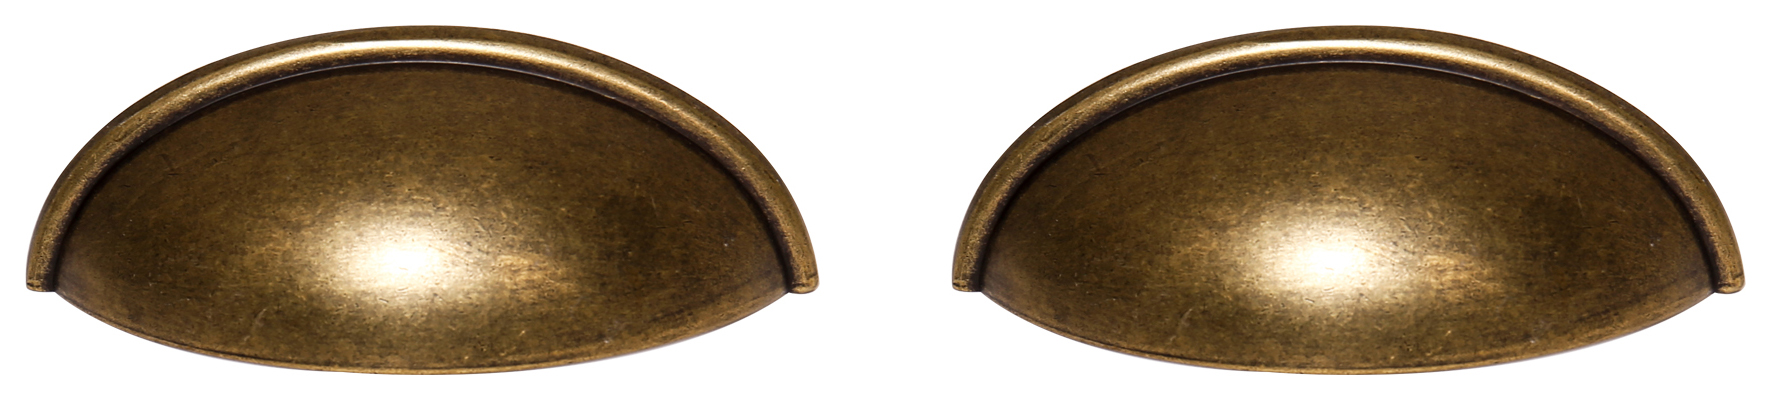 Image of Cup Cabinet Handle Antique Brass 80mm - Pack of 2